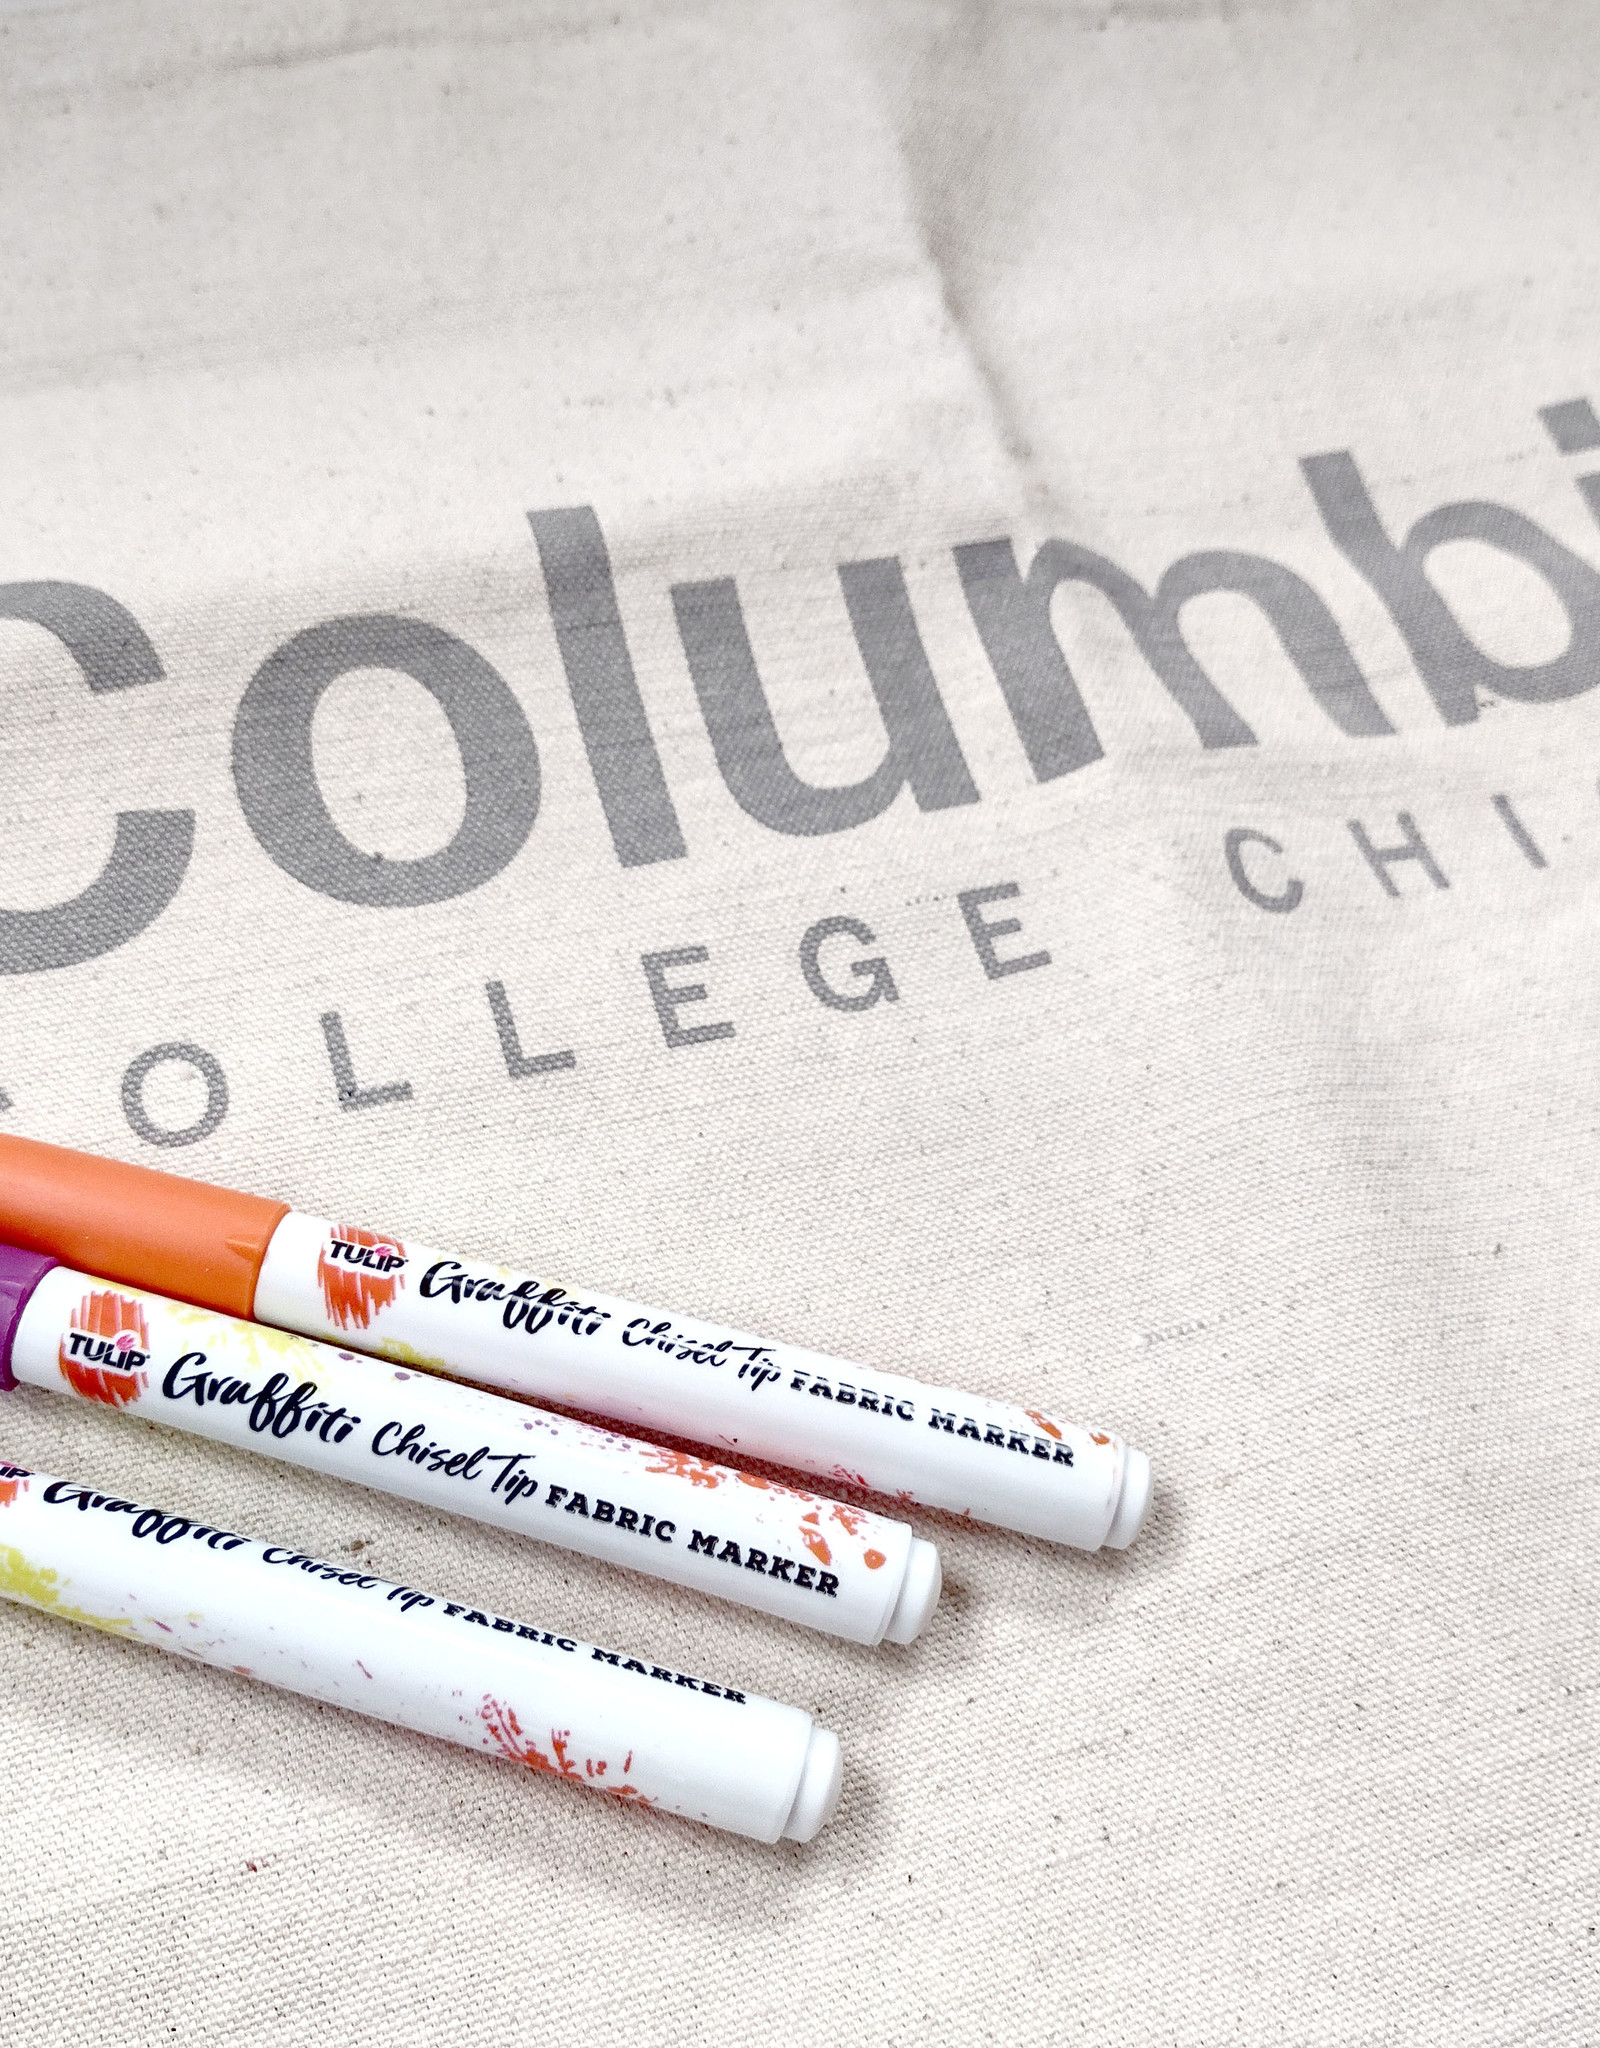 Buy Columbia, By Columbia Camp ShopColumbia Columbia Logo Tote and Fabric Marker Kit